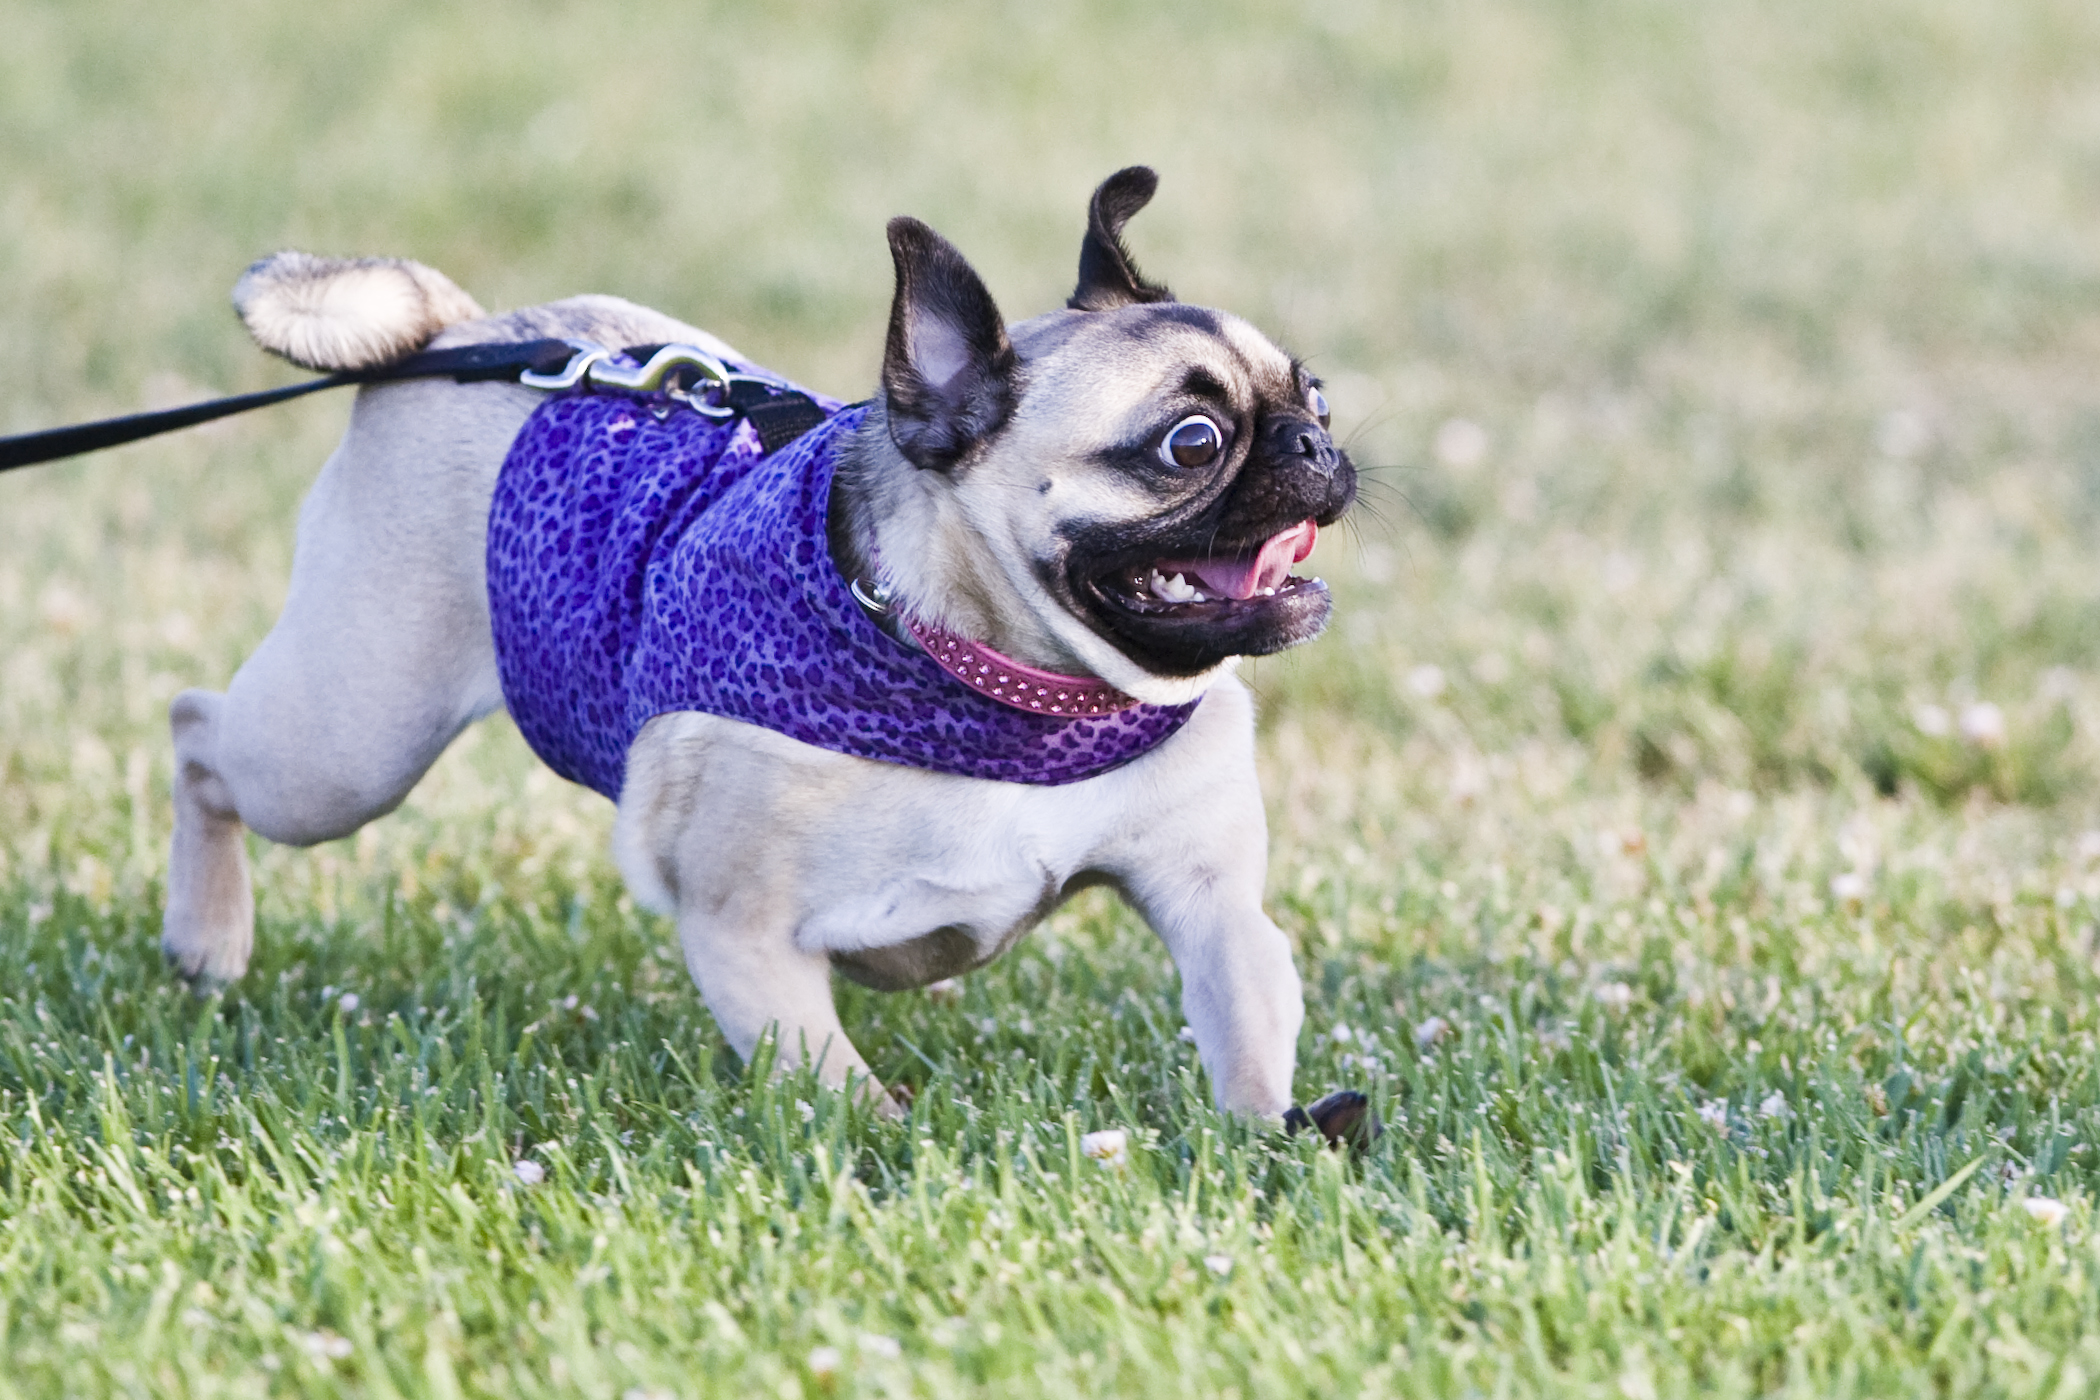 small pug dressed up in purple clothing running through the grass